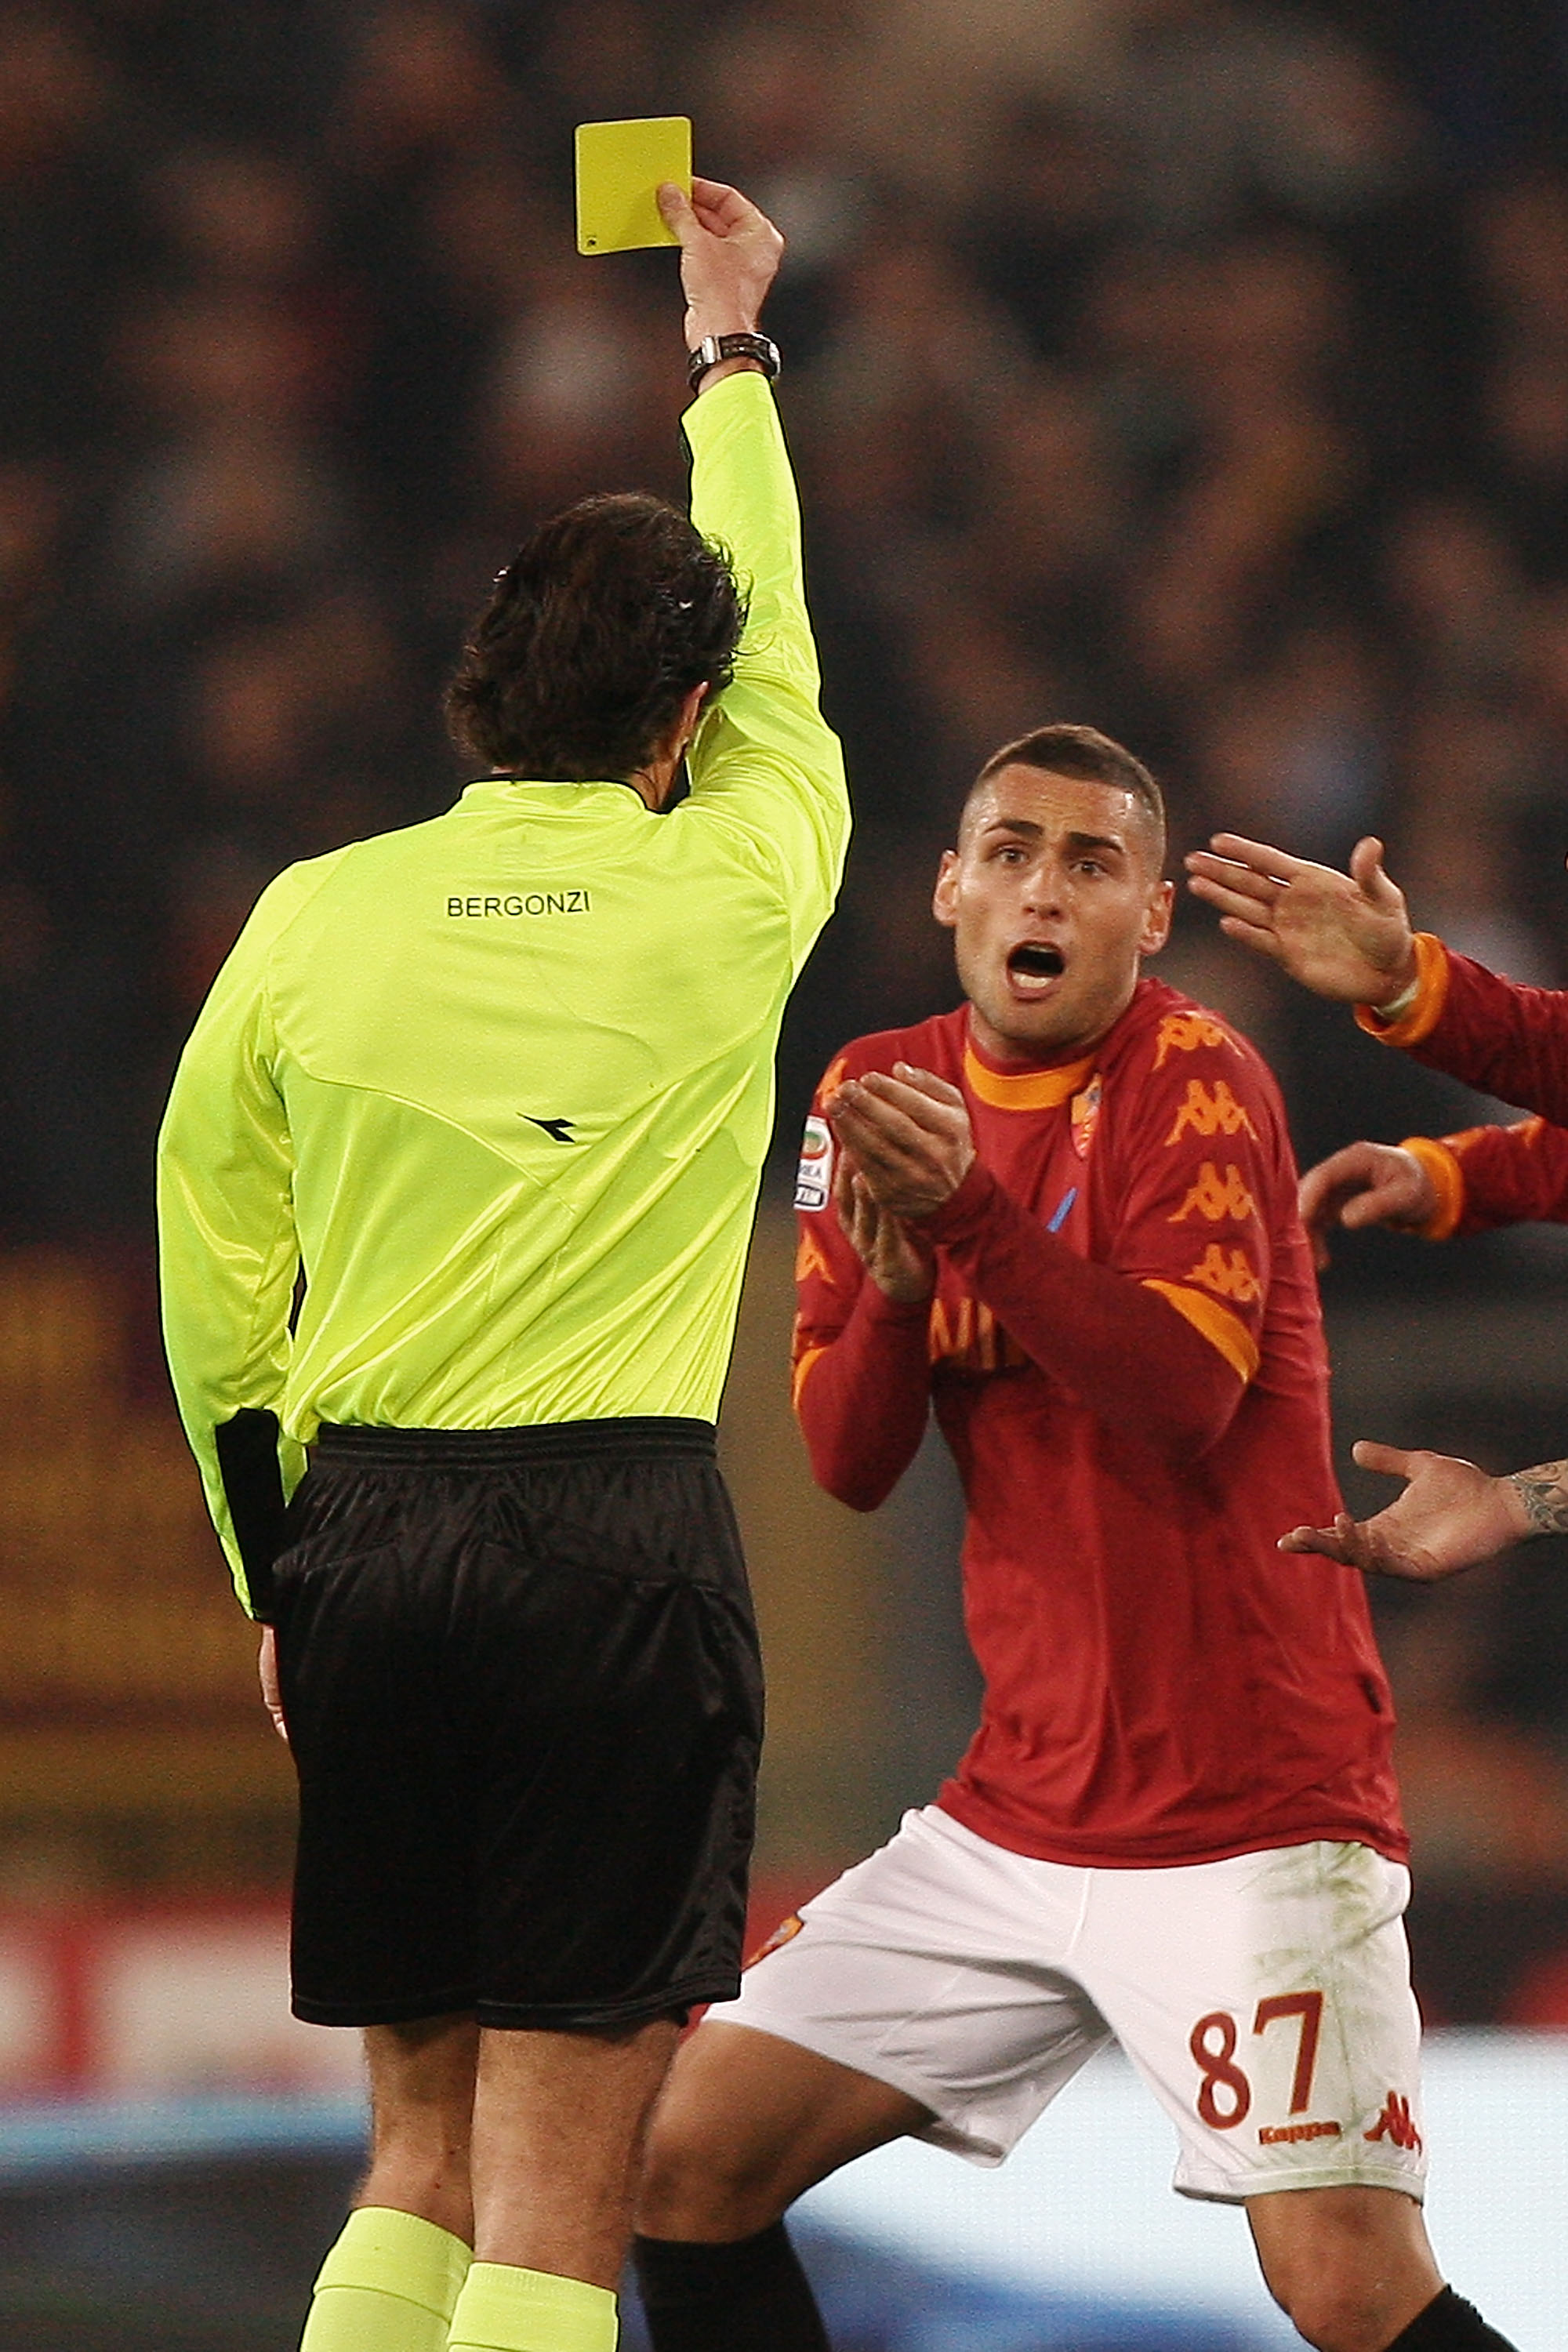 ROME, ITALY - FEBRUARY 12:  The referee Mauro Bergonzi (L) shows the yellow card to Aleandro Rosi of AS Roma during the Serie A match between AS Roma and SSC Napoli at Stadio Olimpico on February 12, 2011 in Rome, Italy.  (Photo by Paolo Bruno/Getty Image